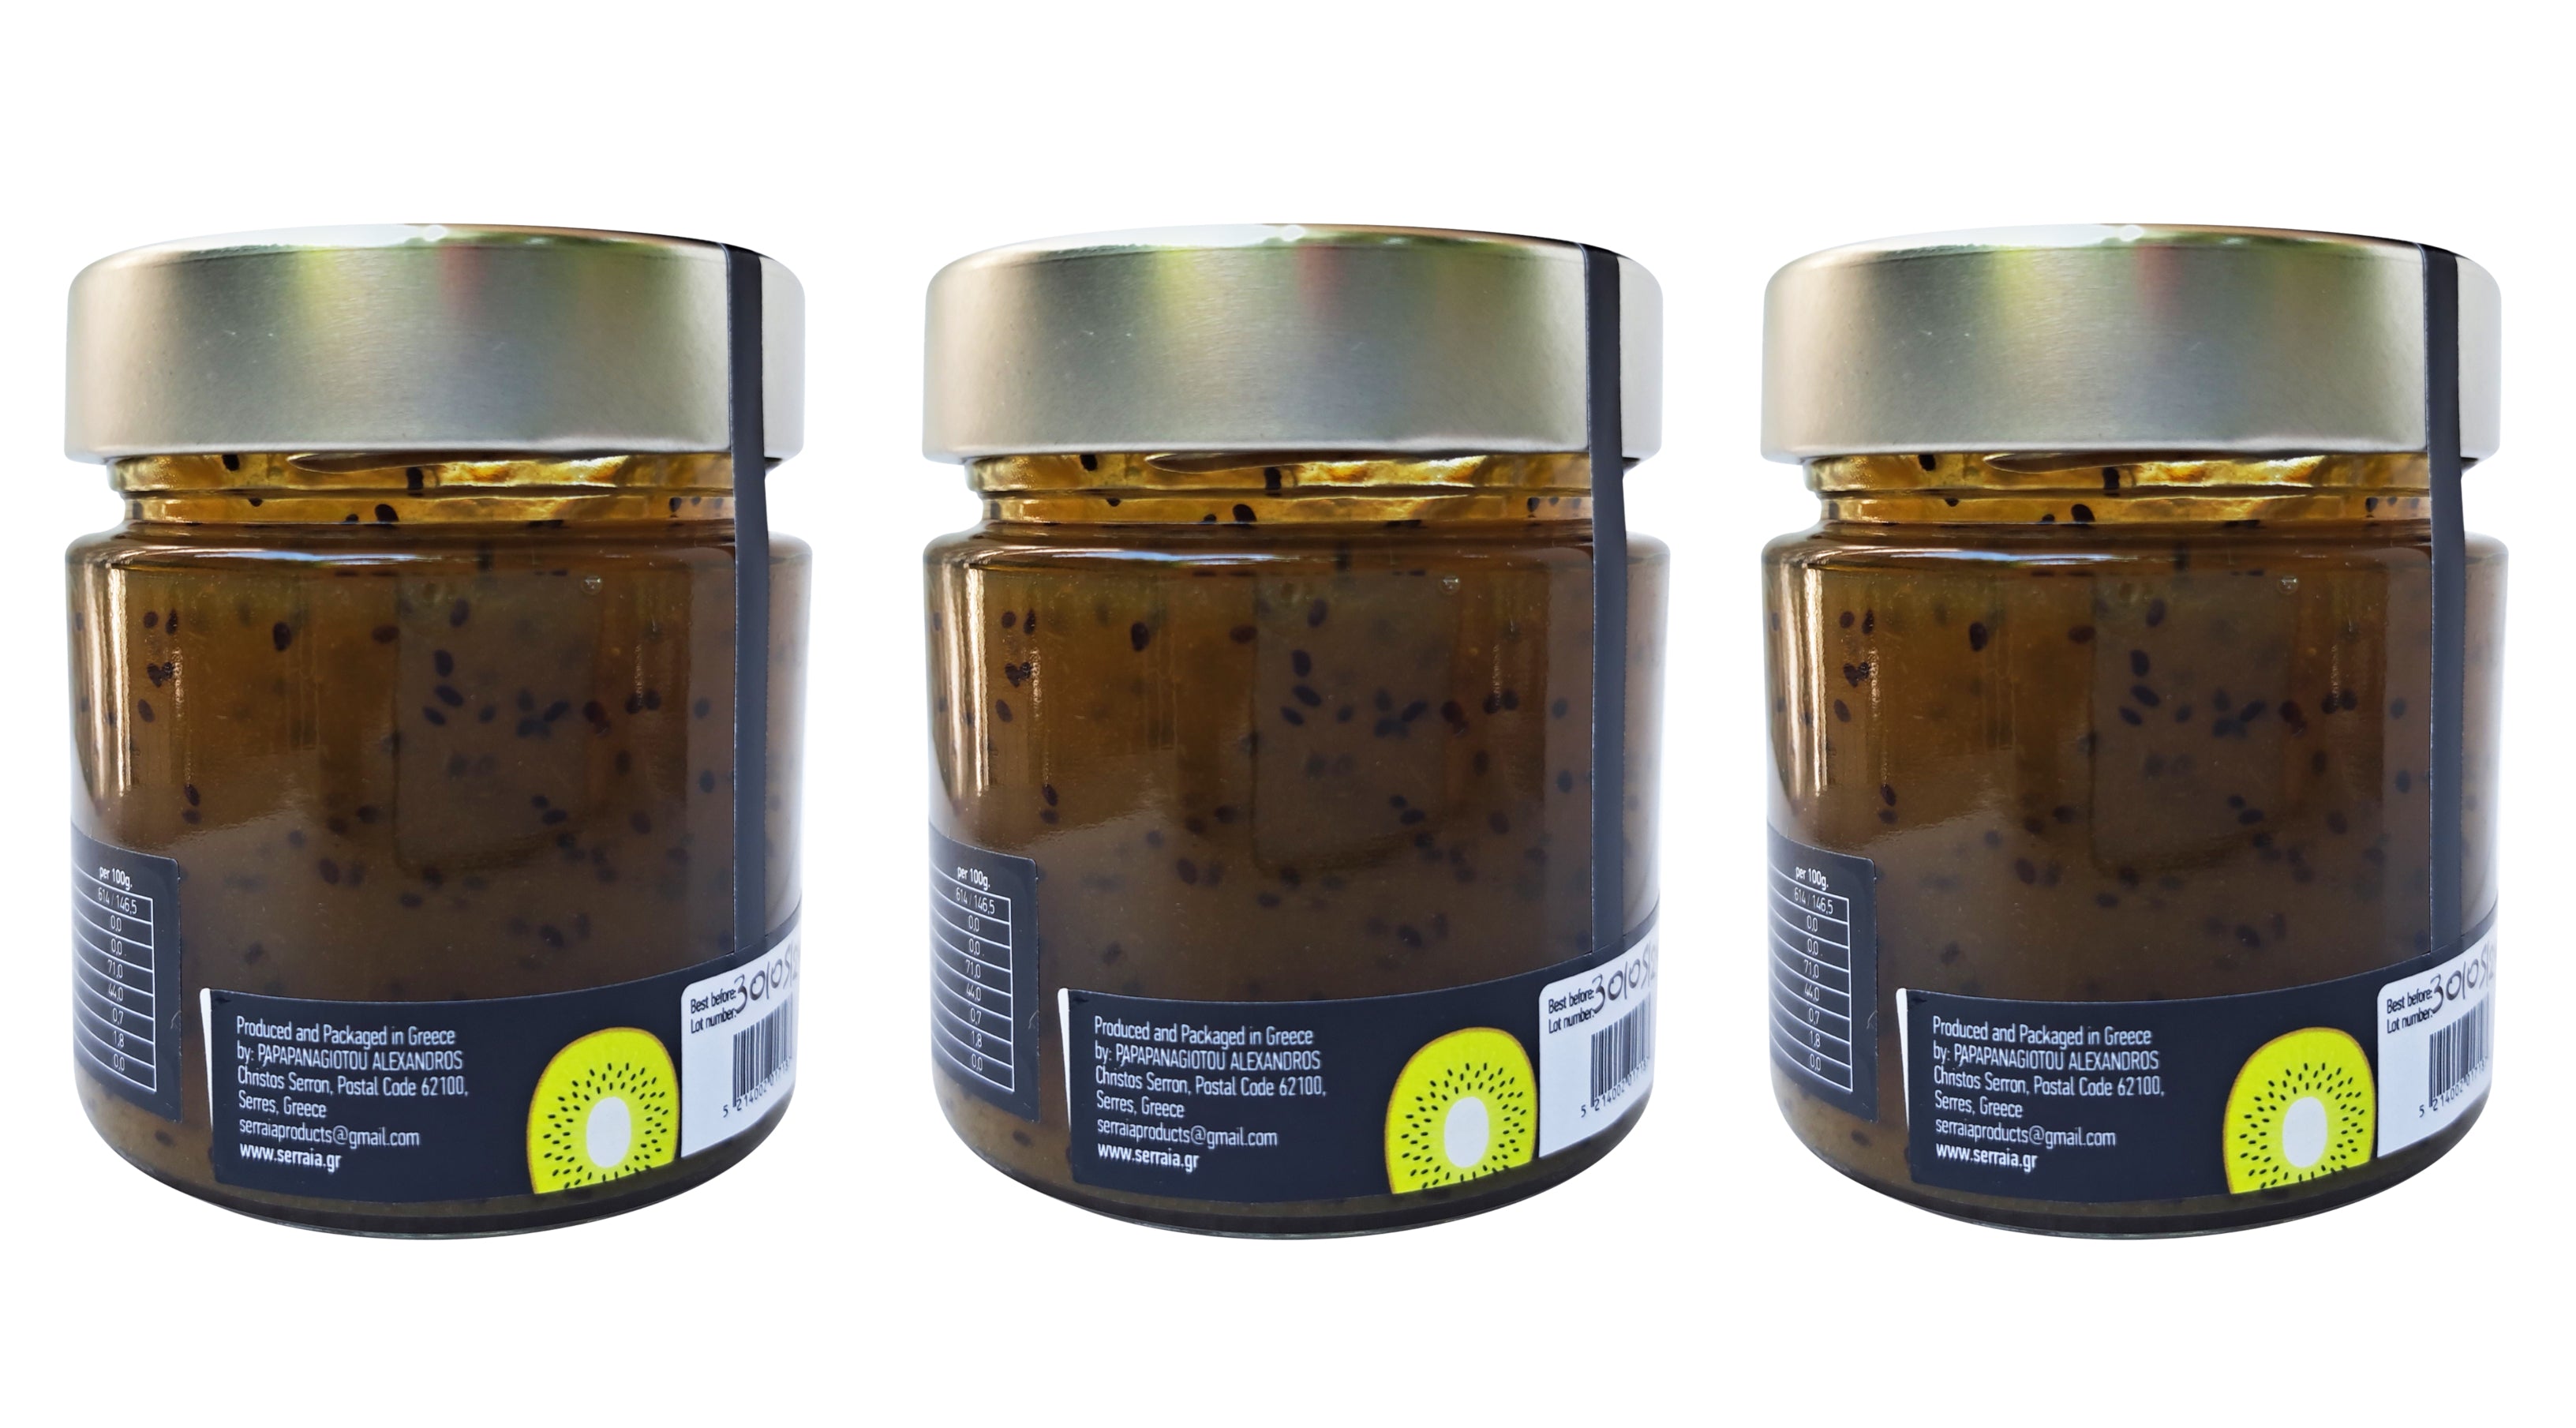 Greek Natural 100% Ηandmade Fruit Spread Kiwi with Honey 6